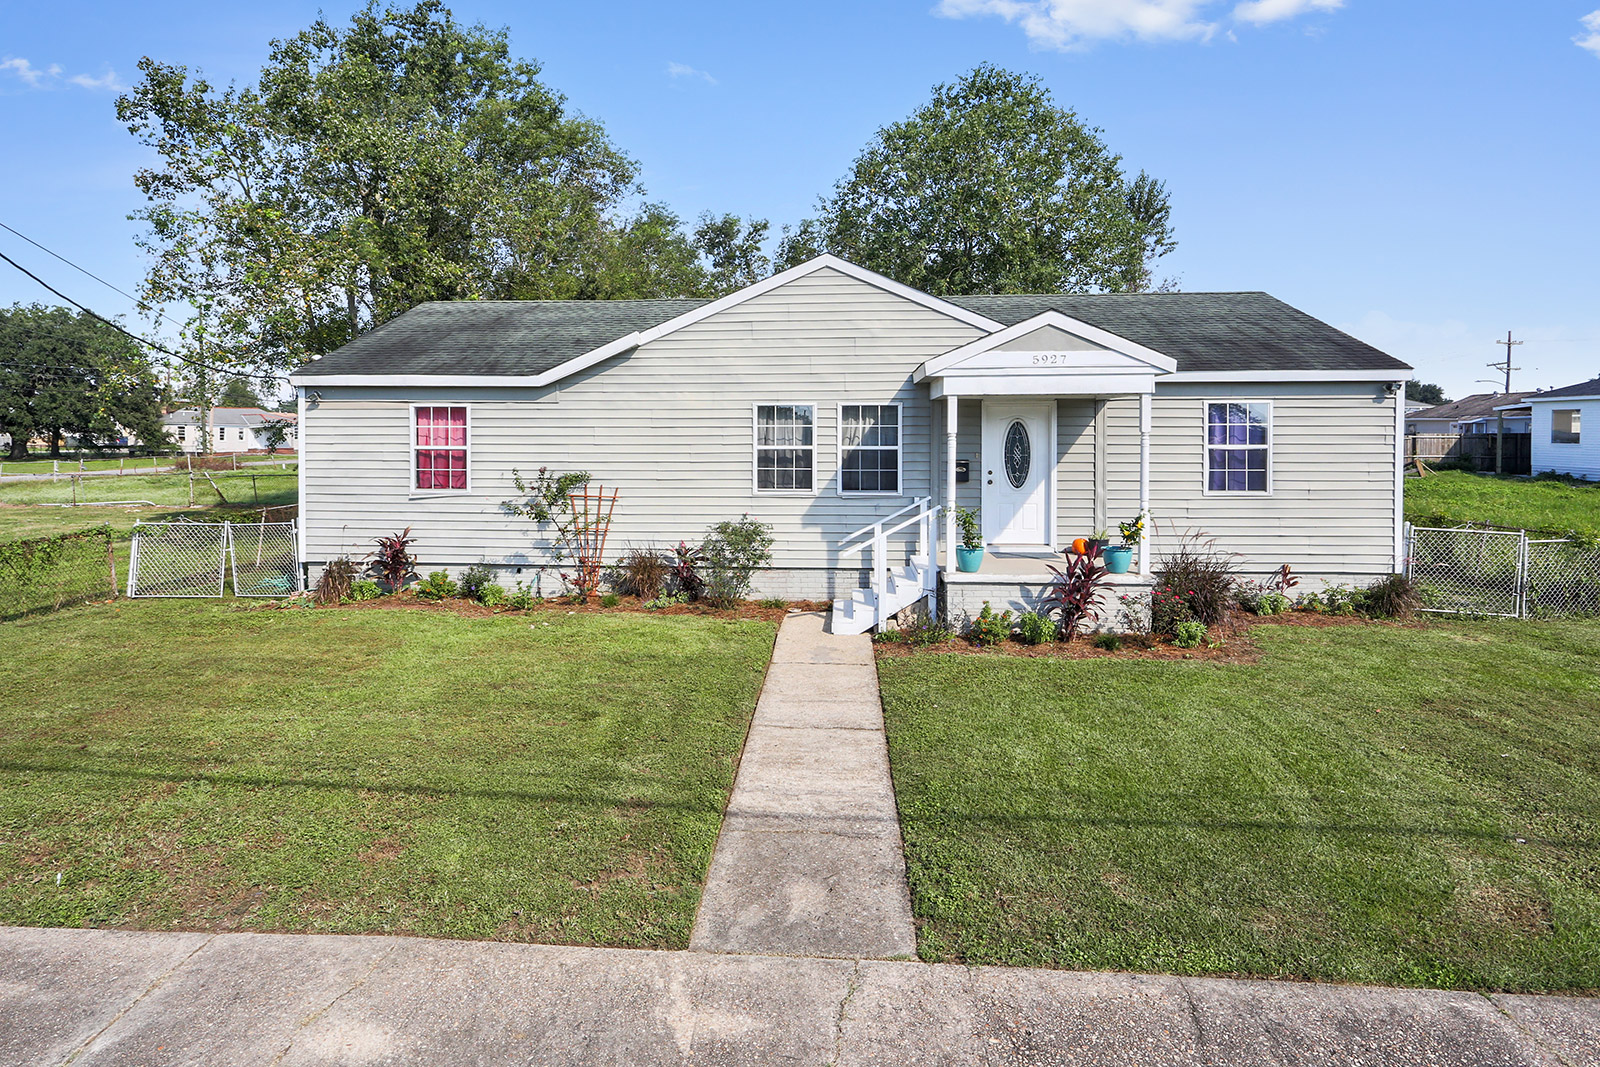 Adorable home on expansive lot in Gentilly/Milneburg